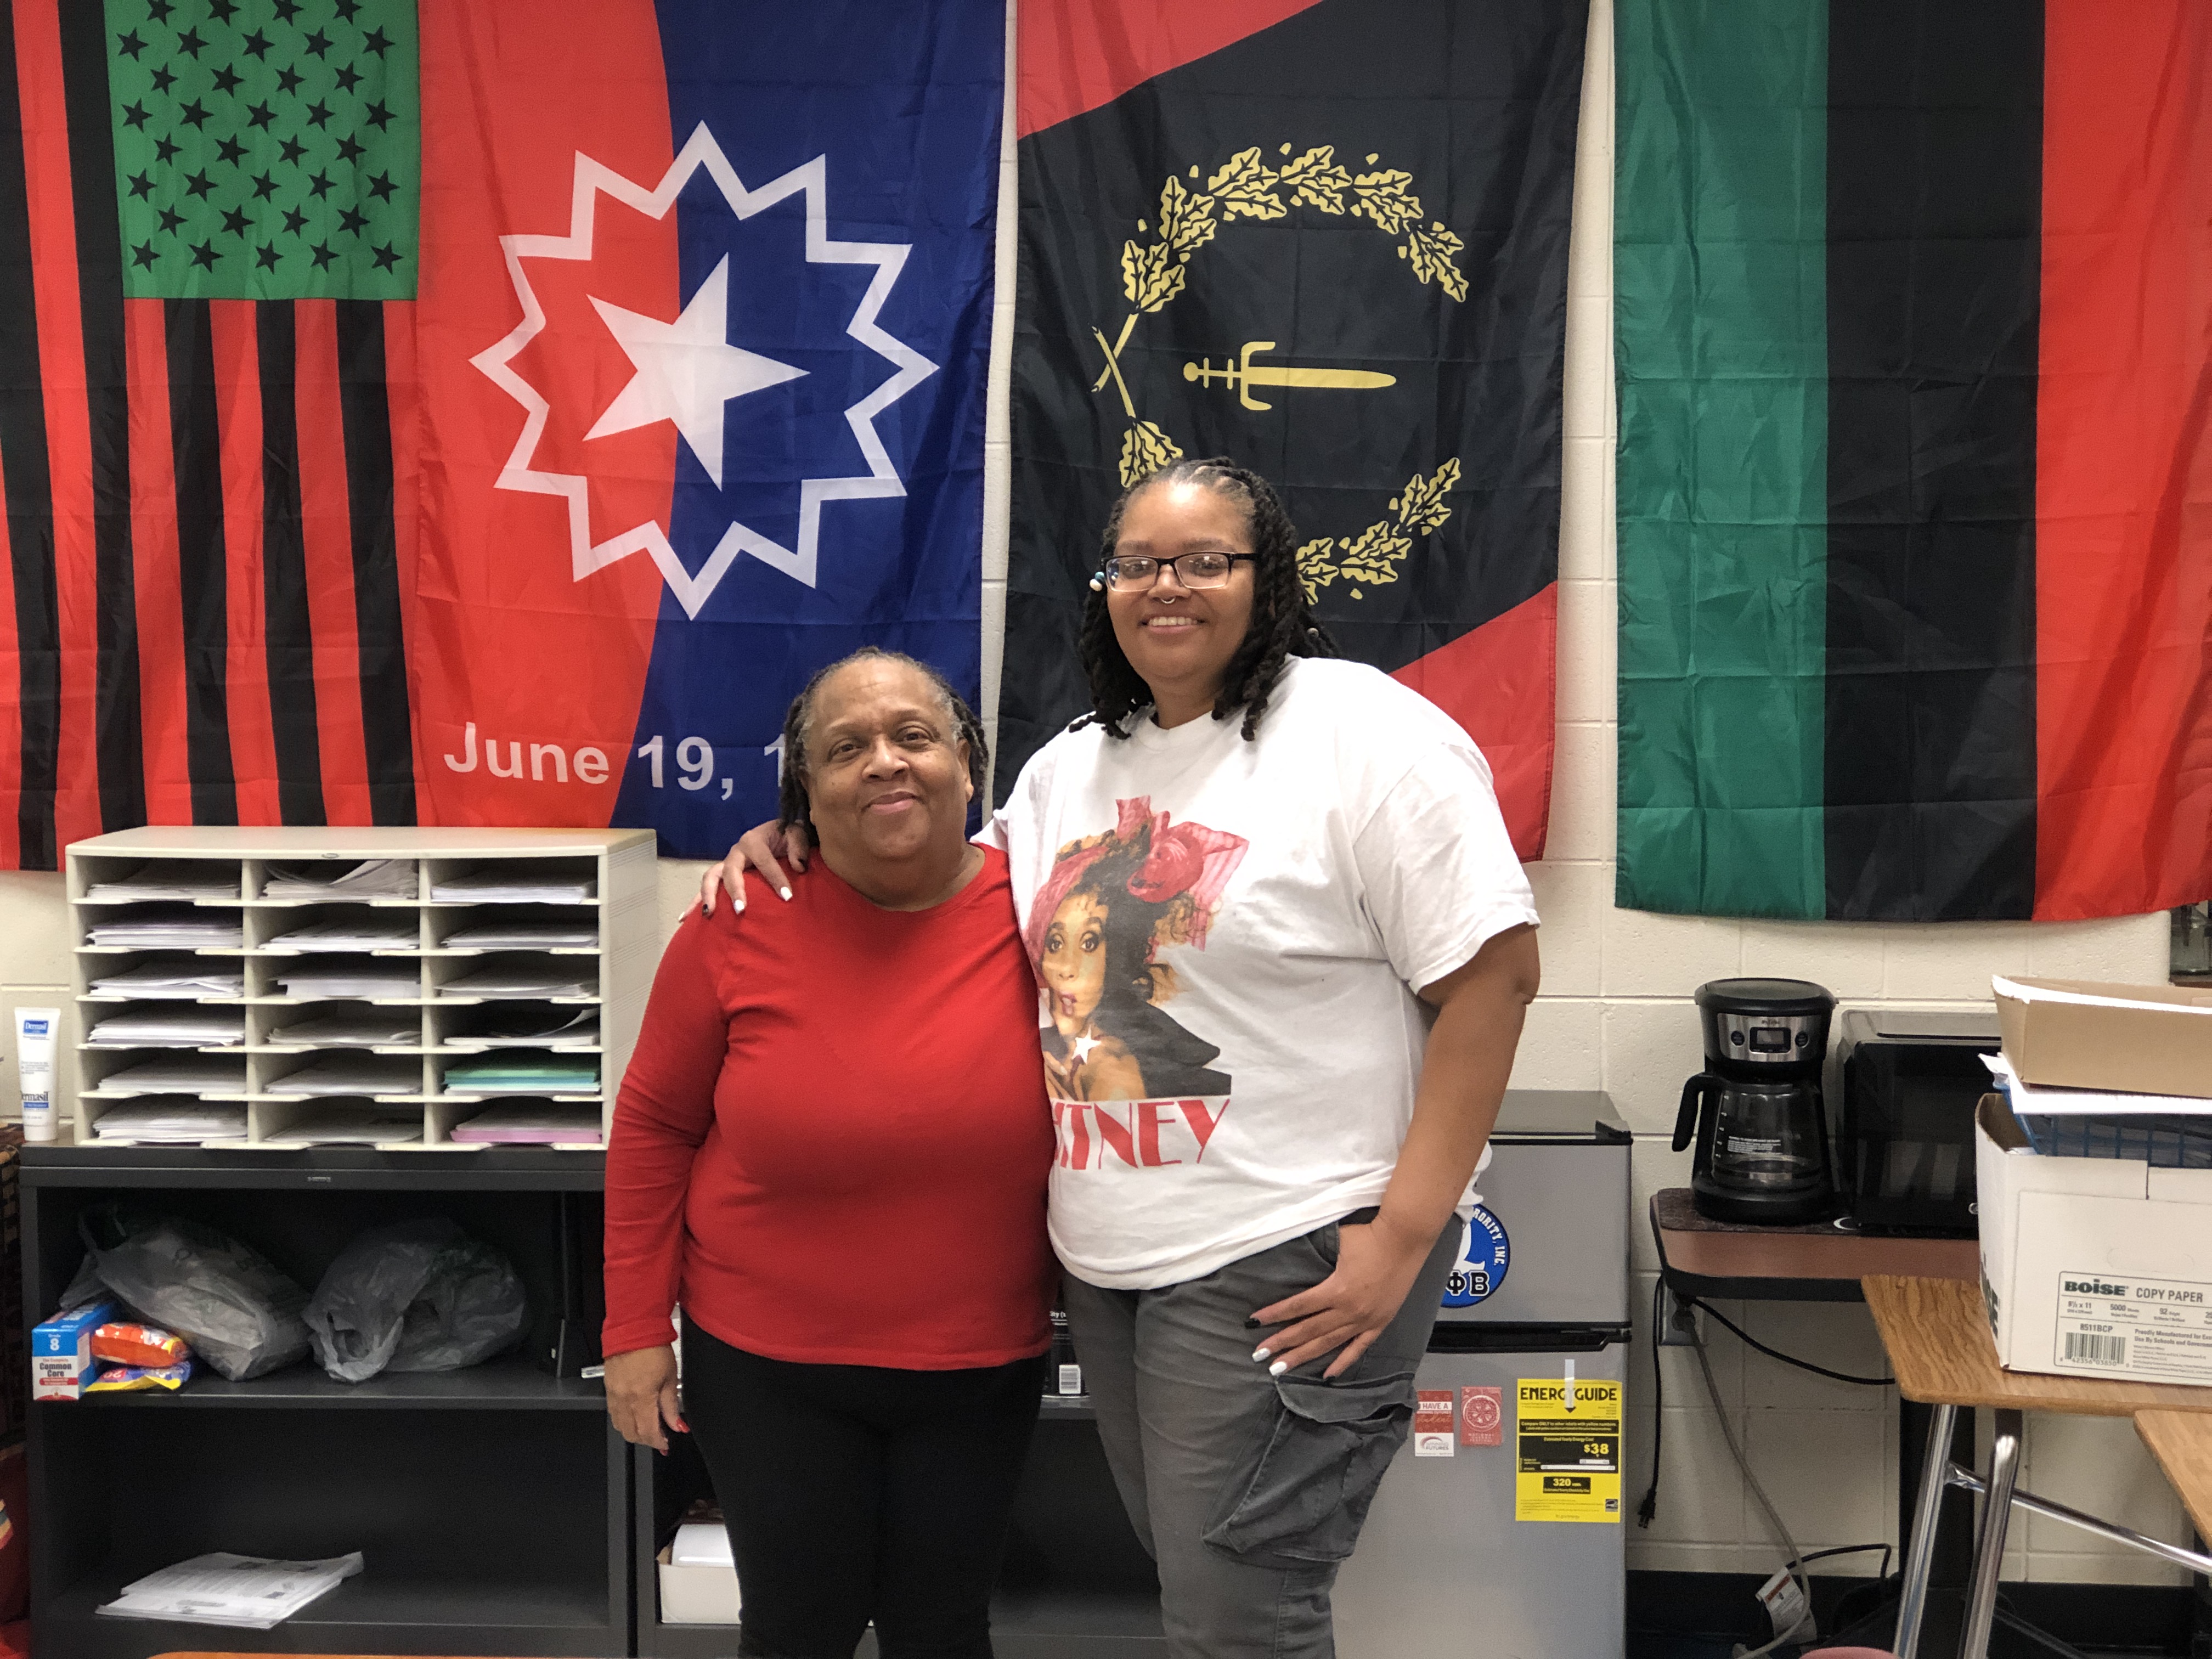 A picture of Deborah Robertson and Kiarra Whitelow together in a classroom.